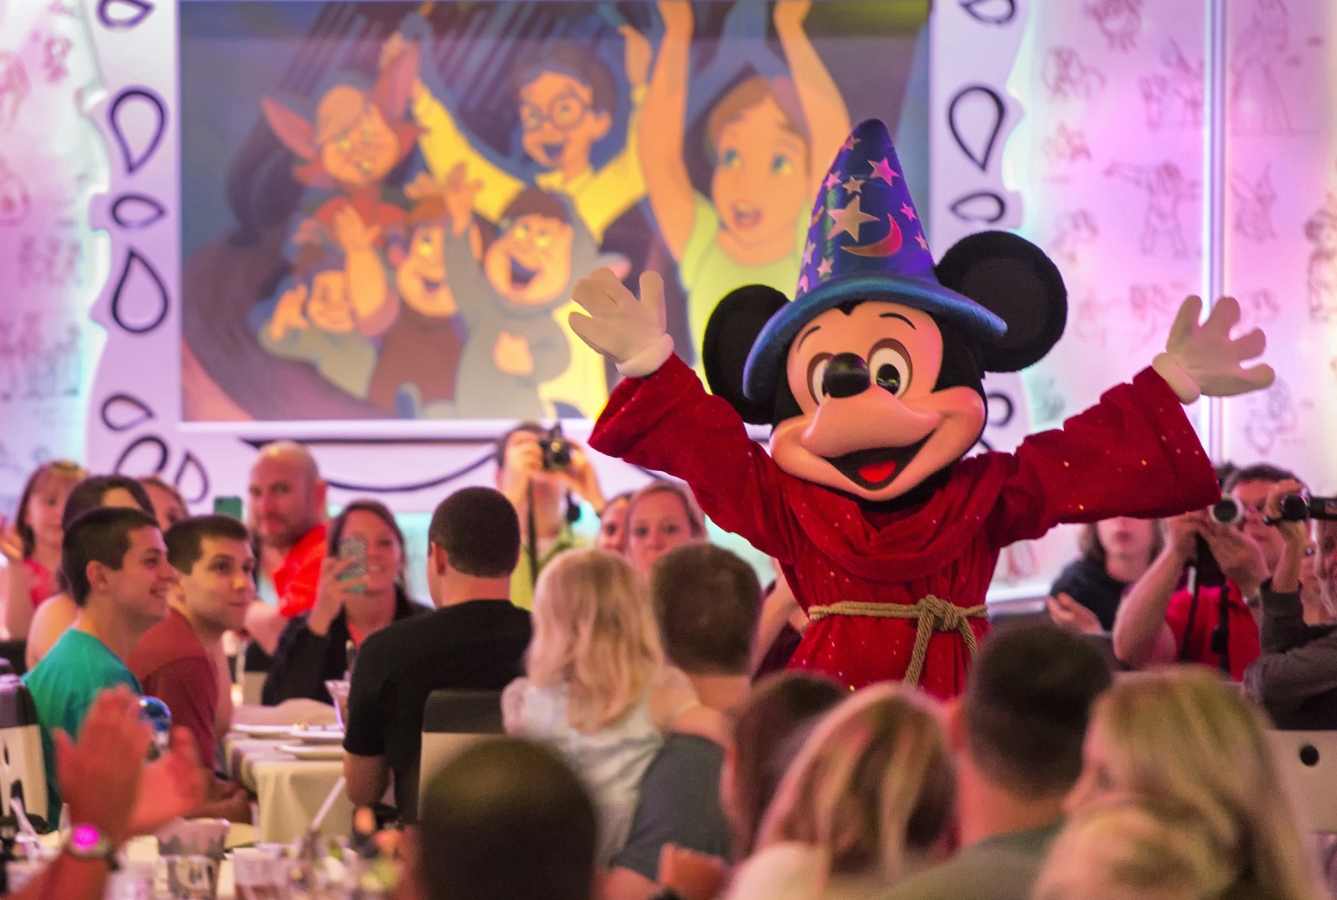 Animator’s Palate has Mickey to entertain its guests.